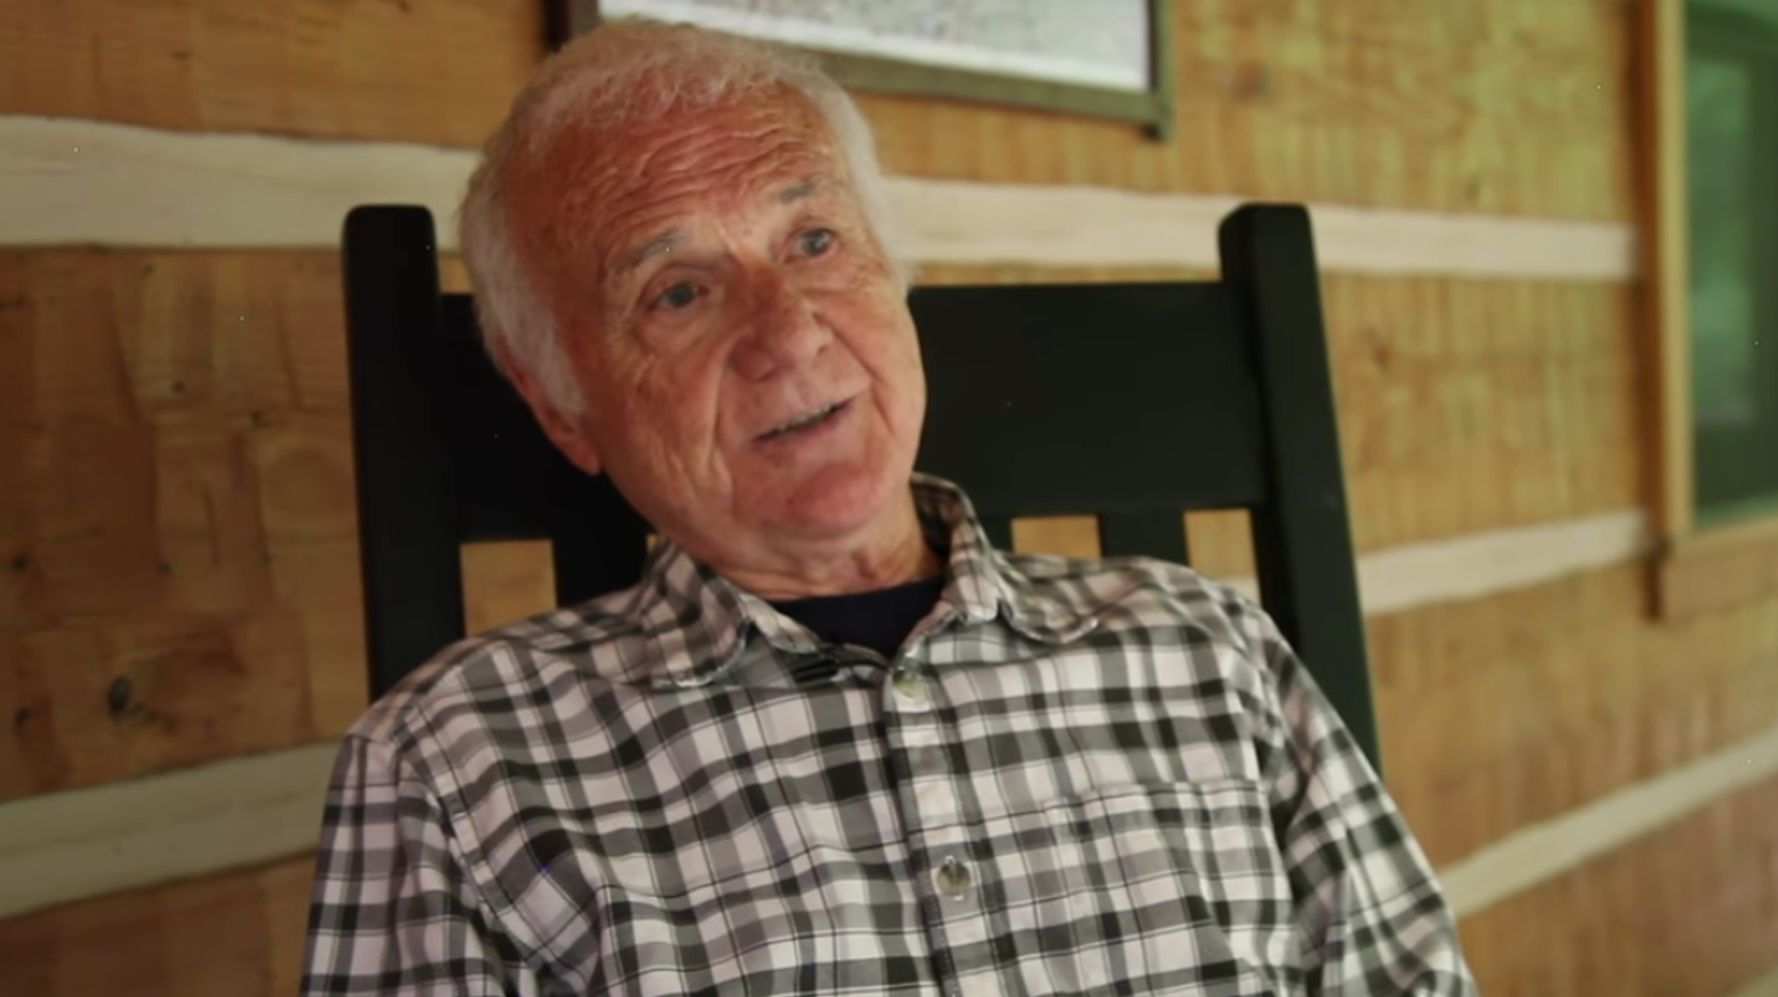 Old Woman Young Boy - This 83-Year-Old Man Just Starred In His First Porn | HuffPost